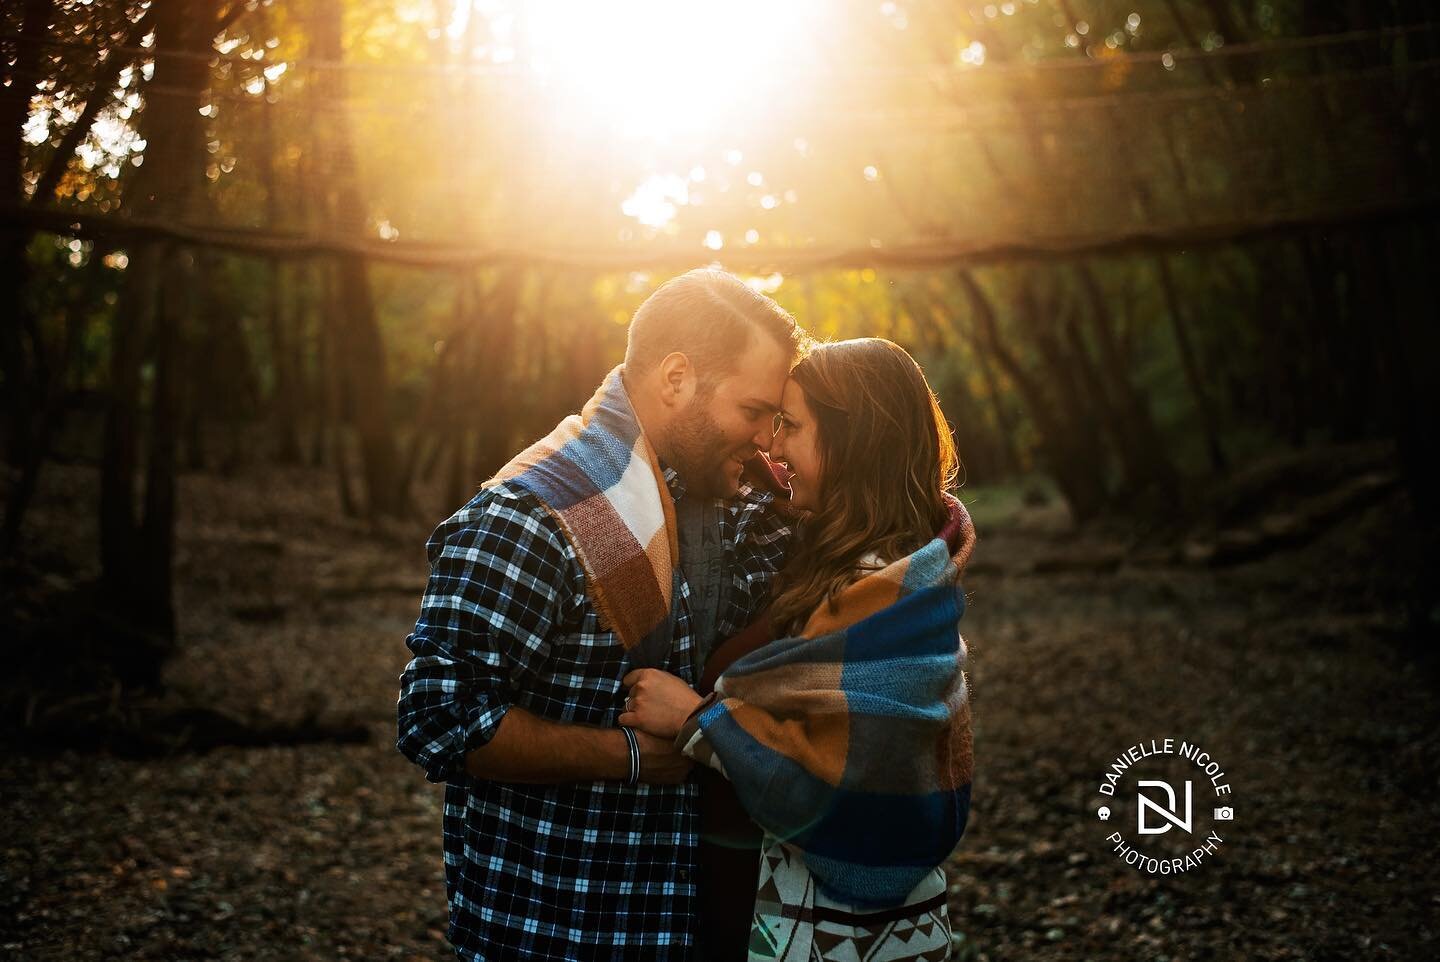 I love shooting love ❤️ y&rsquo;all John and Marissa nailed this engagement session! I can&rsquo;t wait to show you more 😉 #grovecityohiophotographer #grovecityohio 
#grovecitylifestylephotographer #shutterstories #saturdaysundayshootdays #dnbridean